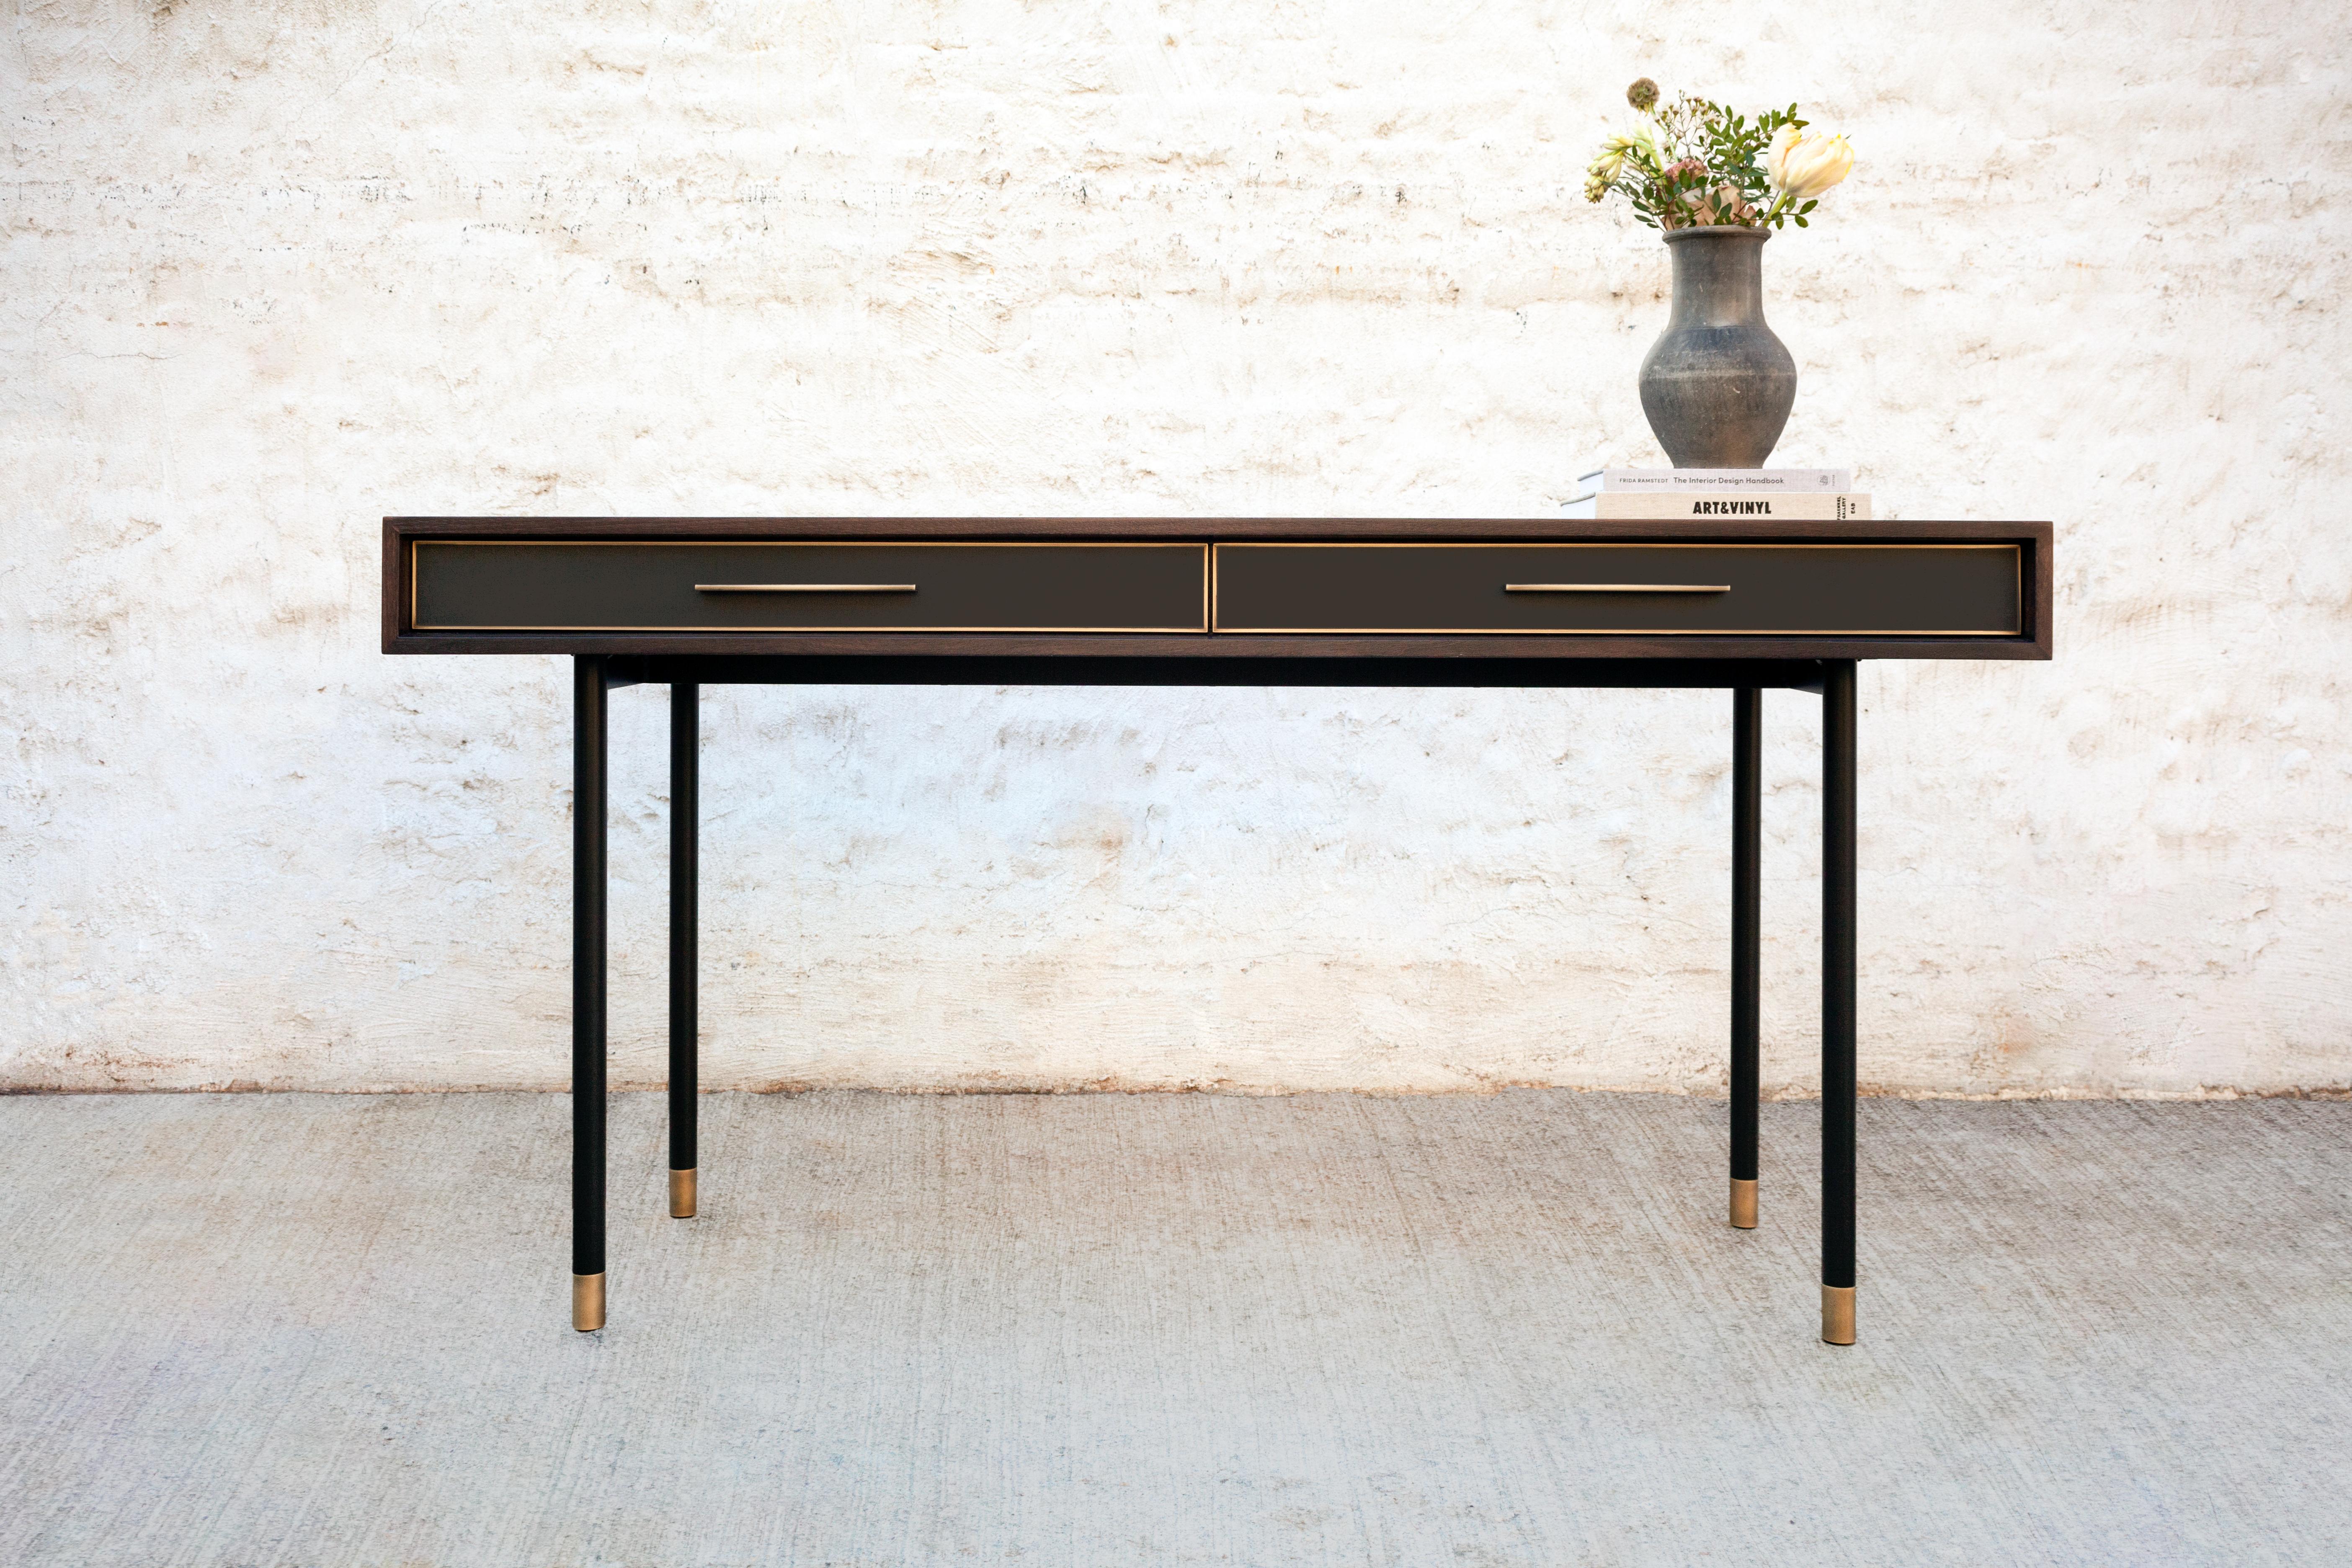 The sleek and striking Jasper console features oxidized walnut, a blackened steel frame and bronze base with adjustable feet, and blackened steel encased in epoxy resin drawers with black leather lining and hand-sculpted bronze pulls.

Dimensions